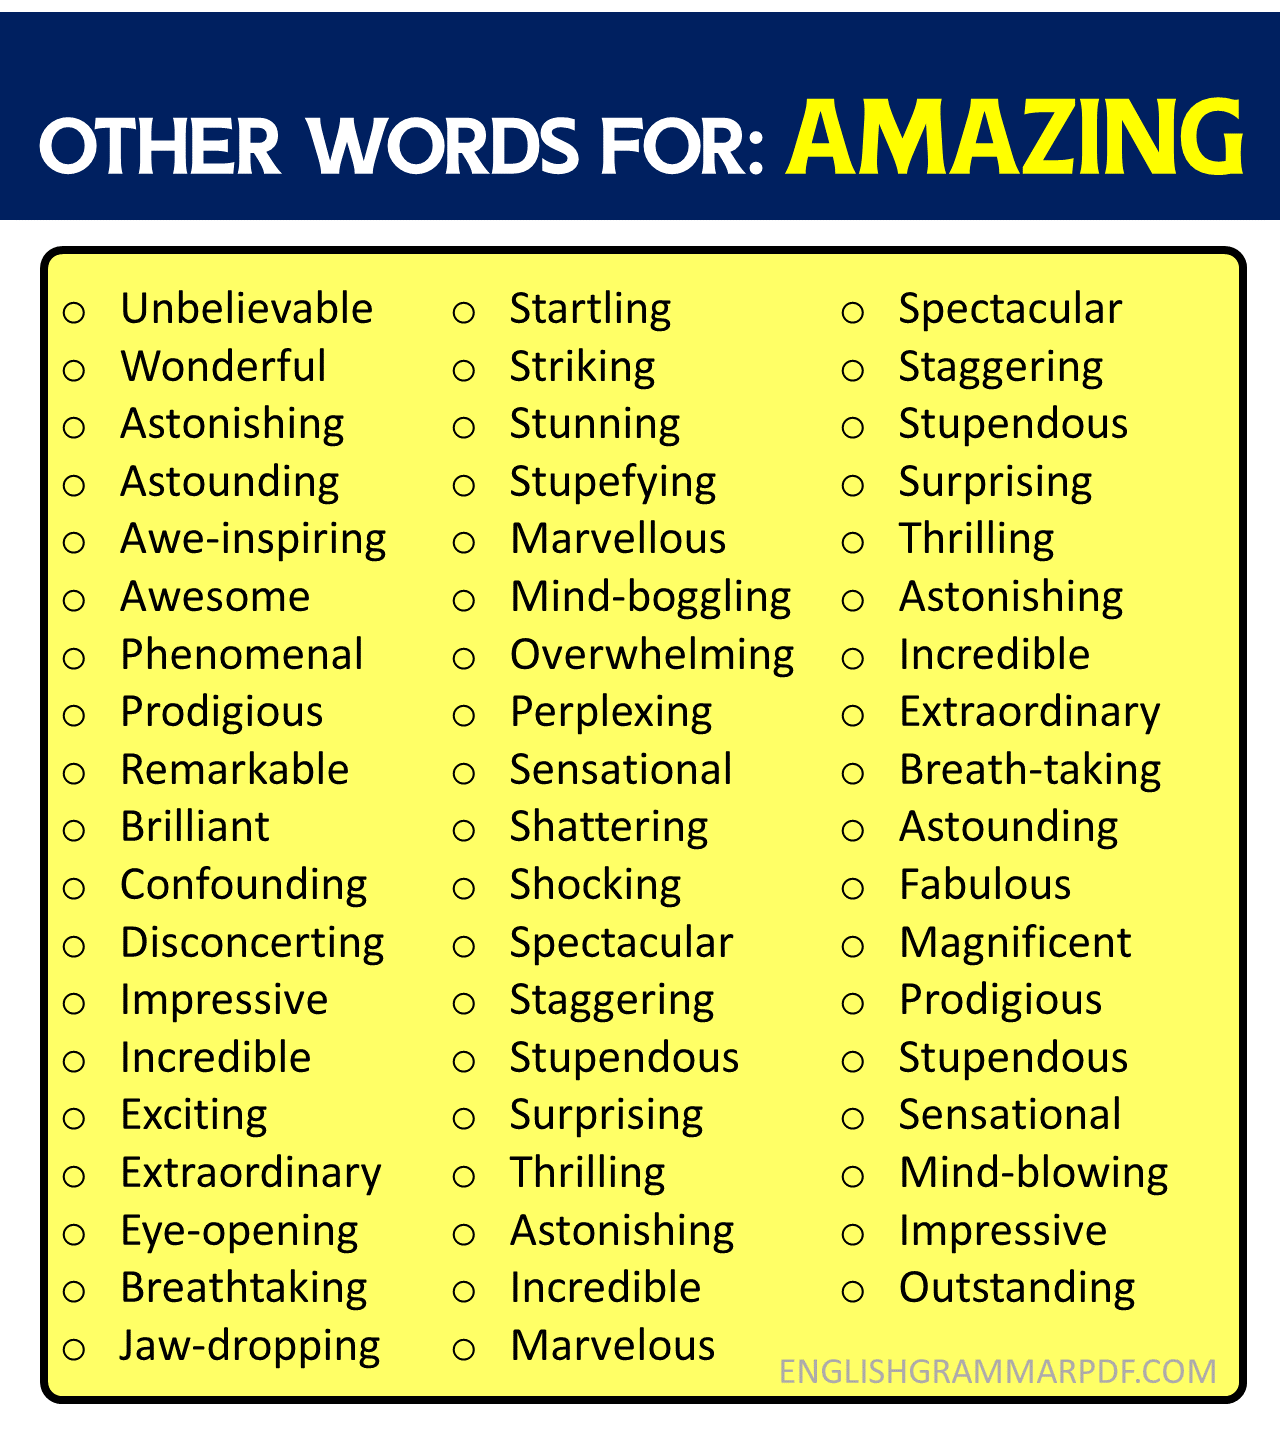 Other Words for AMAZING